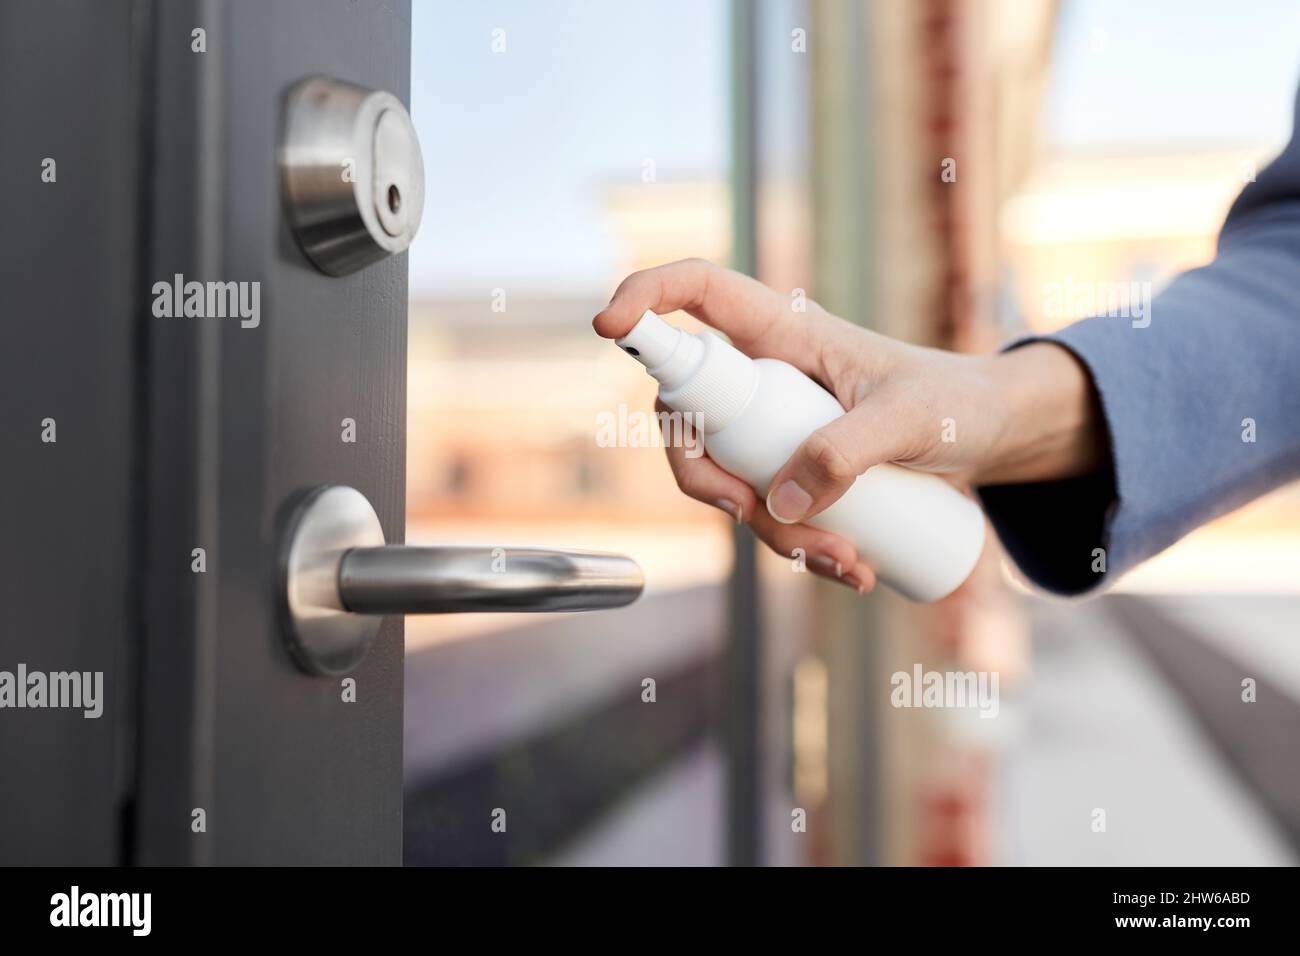 hand cleaning door handle with disinfectant spray Stock Photo